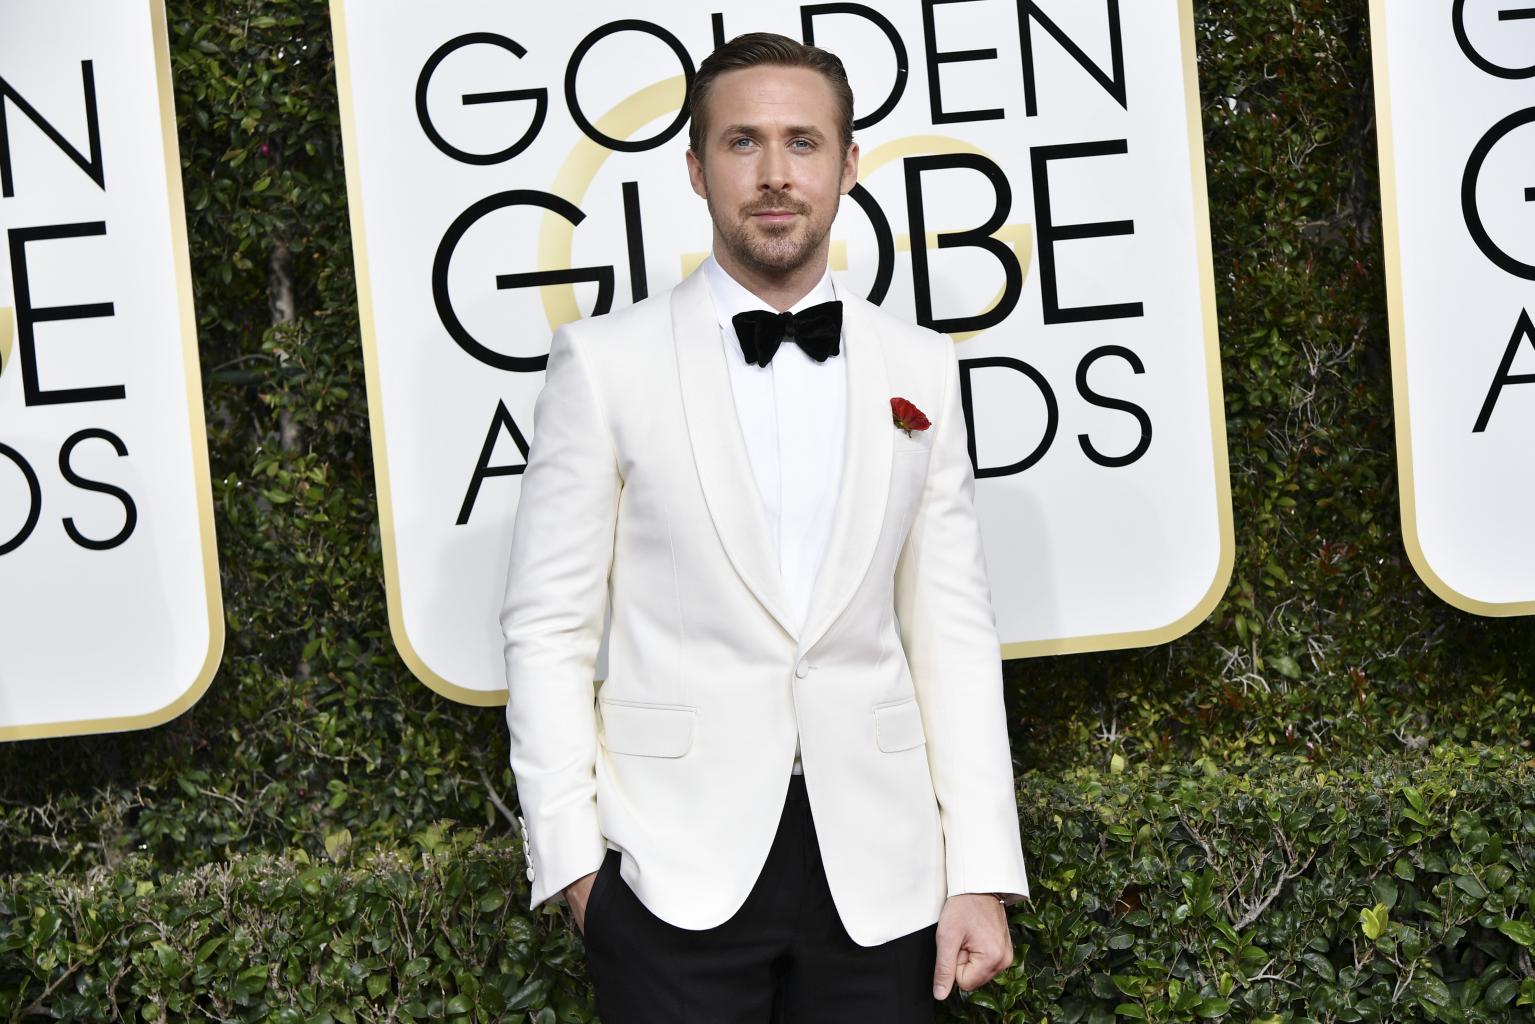 Ryan Gosling Wins Golden Globe For Best Actor in a Motion Picture Comedy or Musical